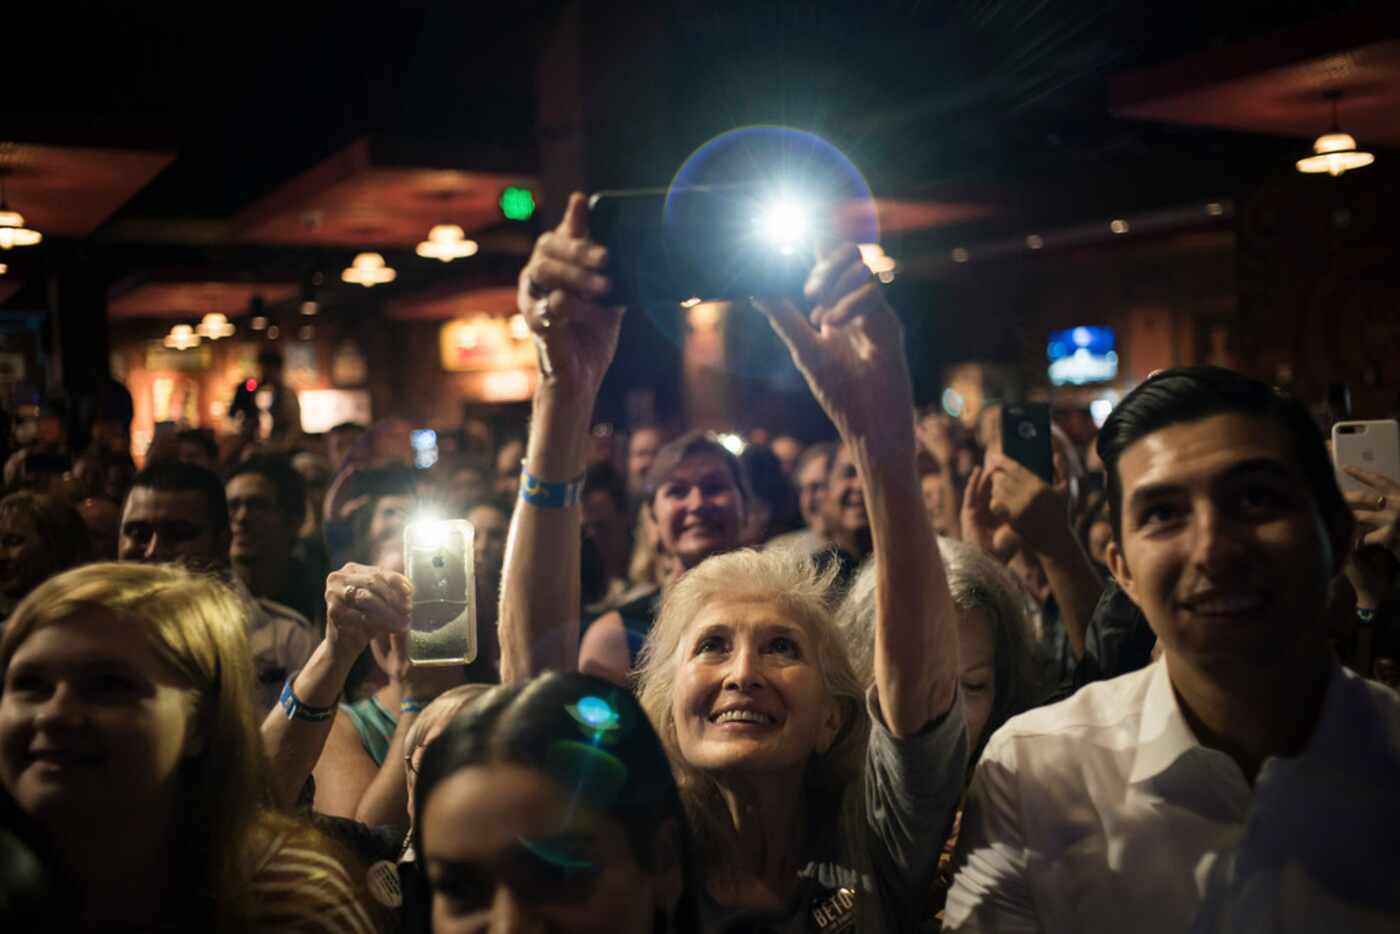 A woman takes a photograph during an event for Rep. Beto O'Rourke (D-Texas), the Democratic...